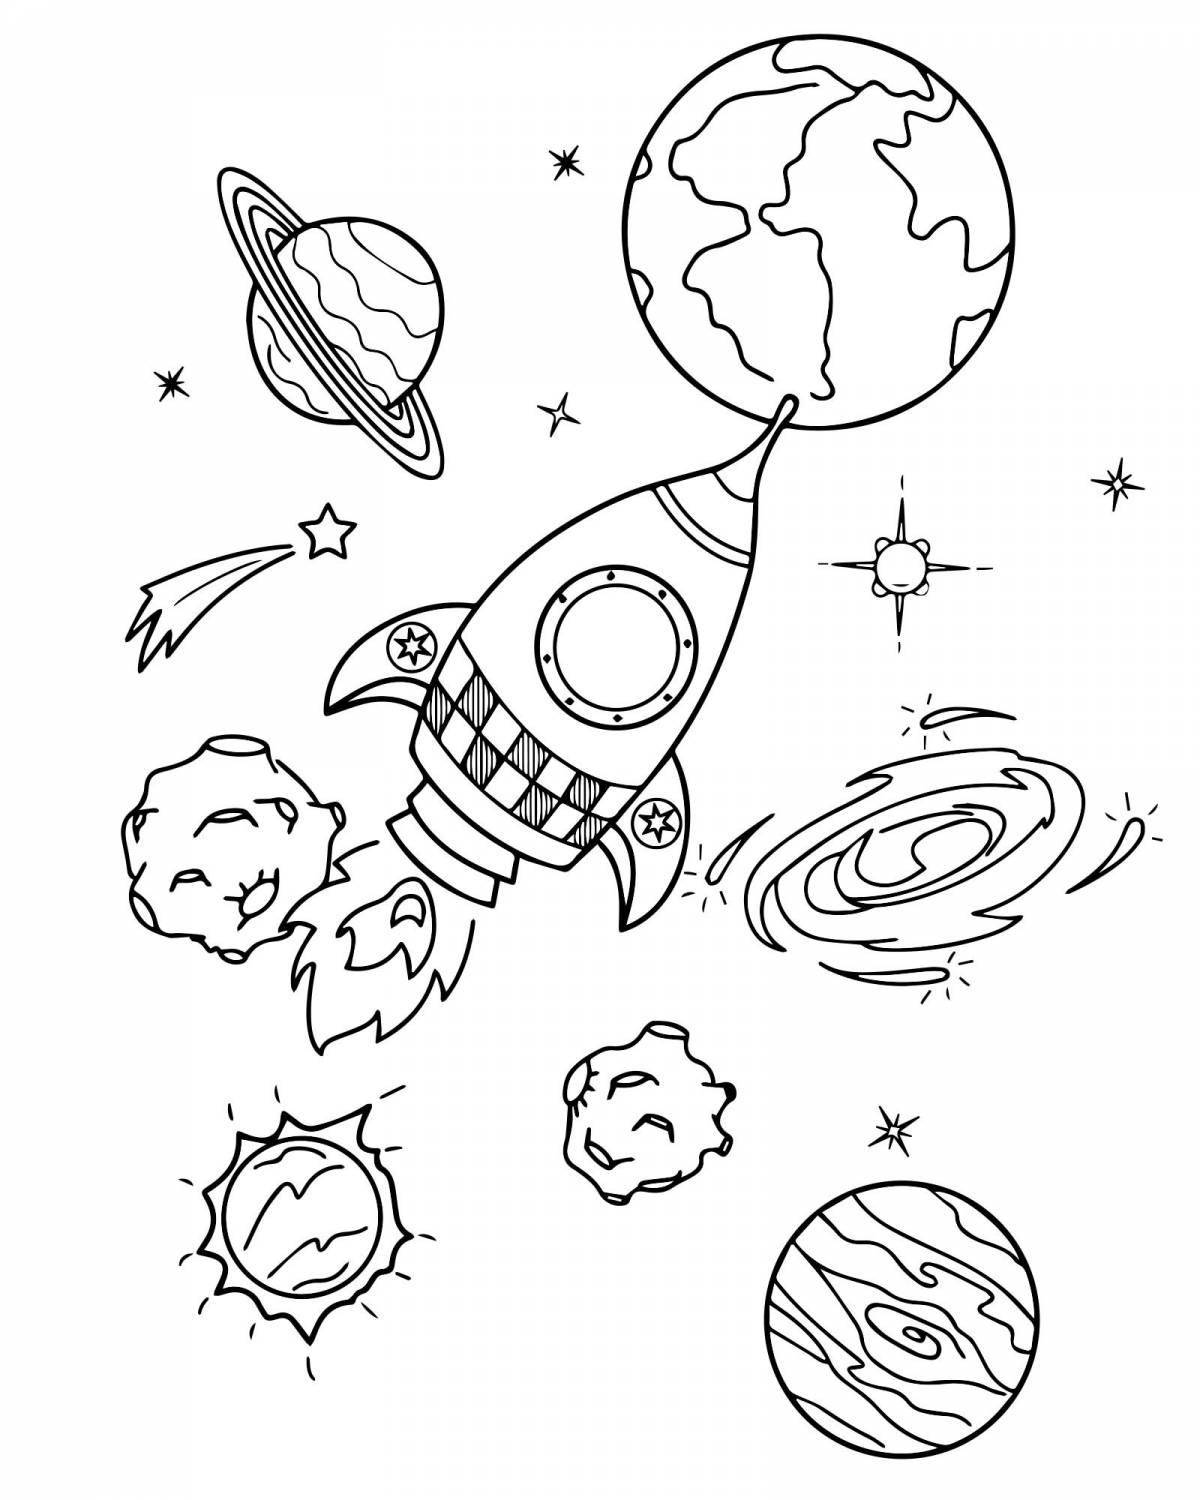 Bright space and planets coloring pages for kids